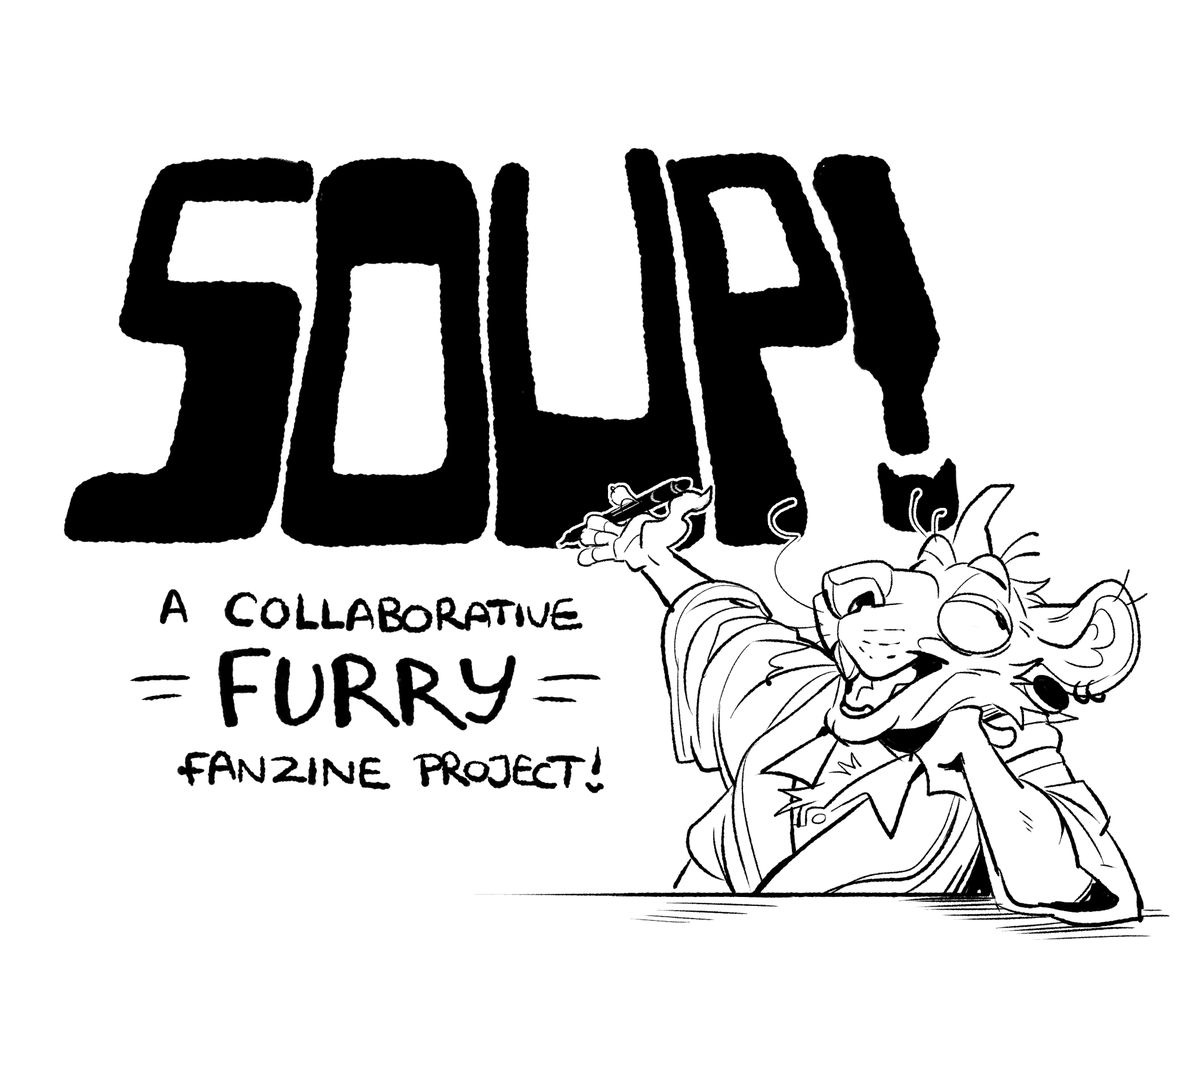 FURRY ARTISTS AND WRITERS WANTED! For SOUP!, an all-furry charity fanzine inspired by the APAs and fanzines from the beginnings of the furry fandom 🔗Expression of interest form link and more details in thread